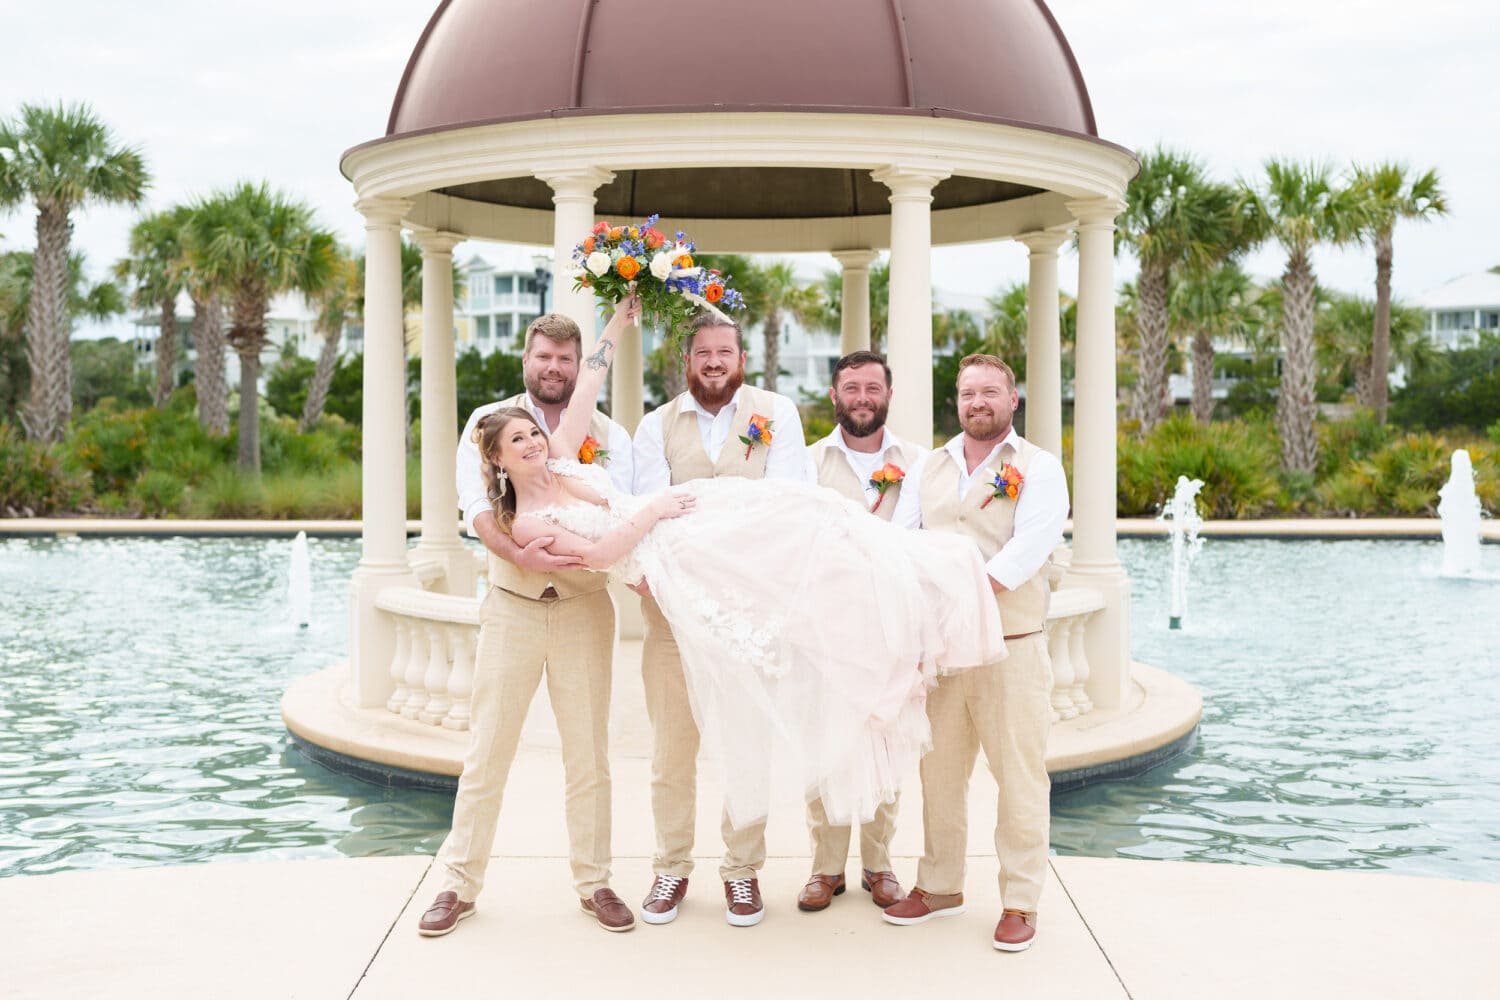 Groomsmen lifting up the bride - 21 Main Events - North Myrtle Beach